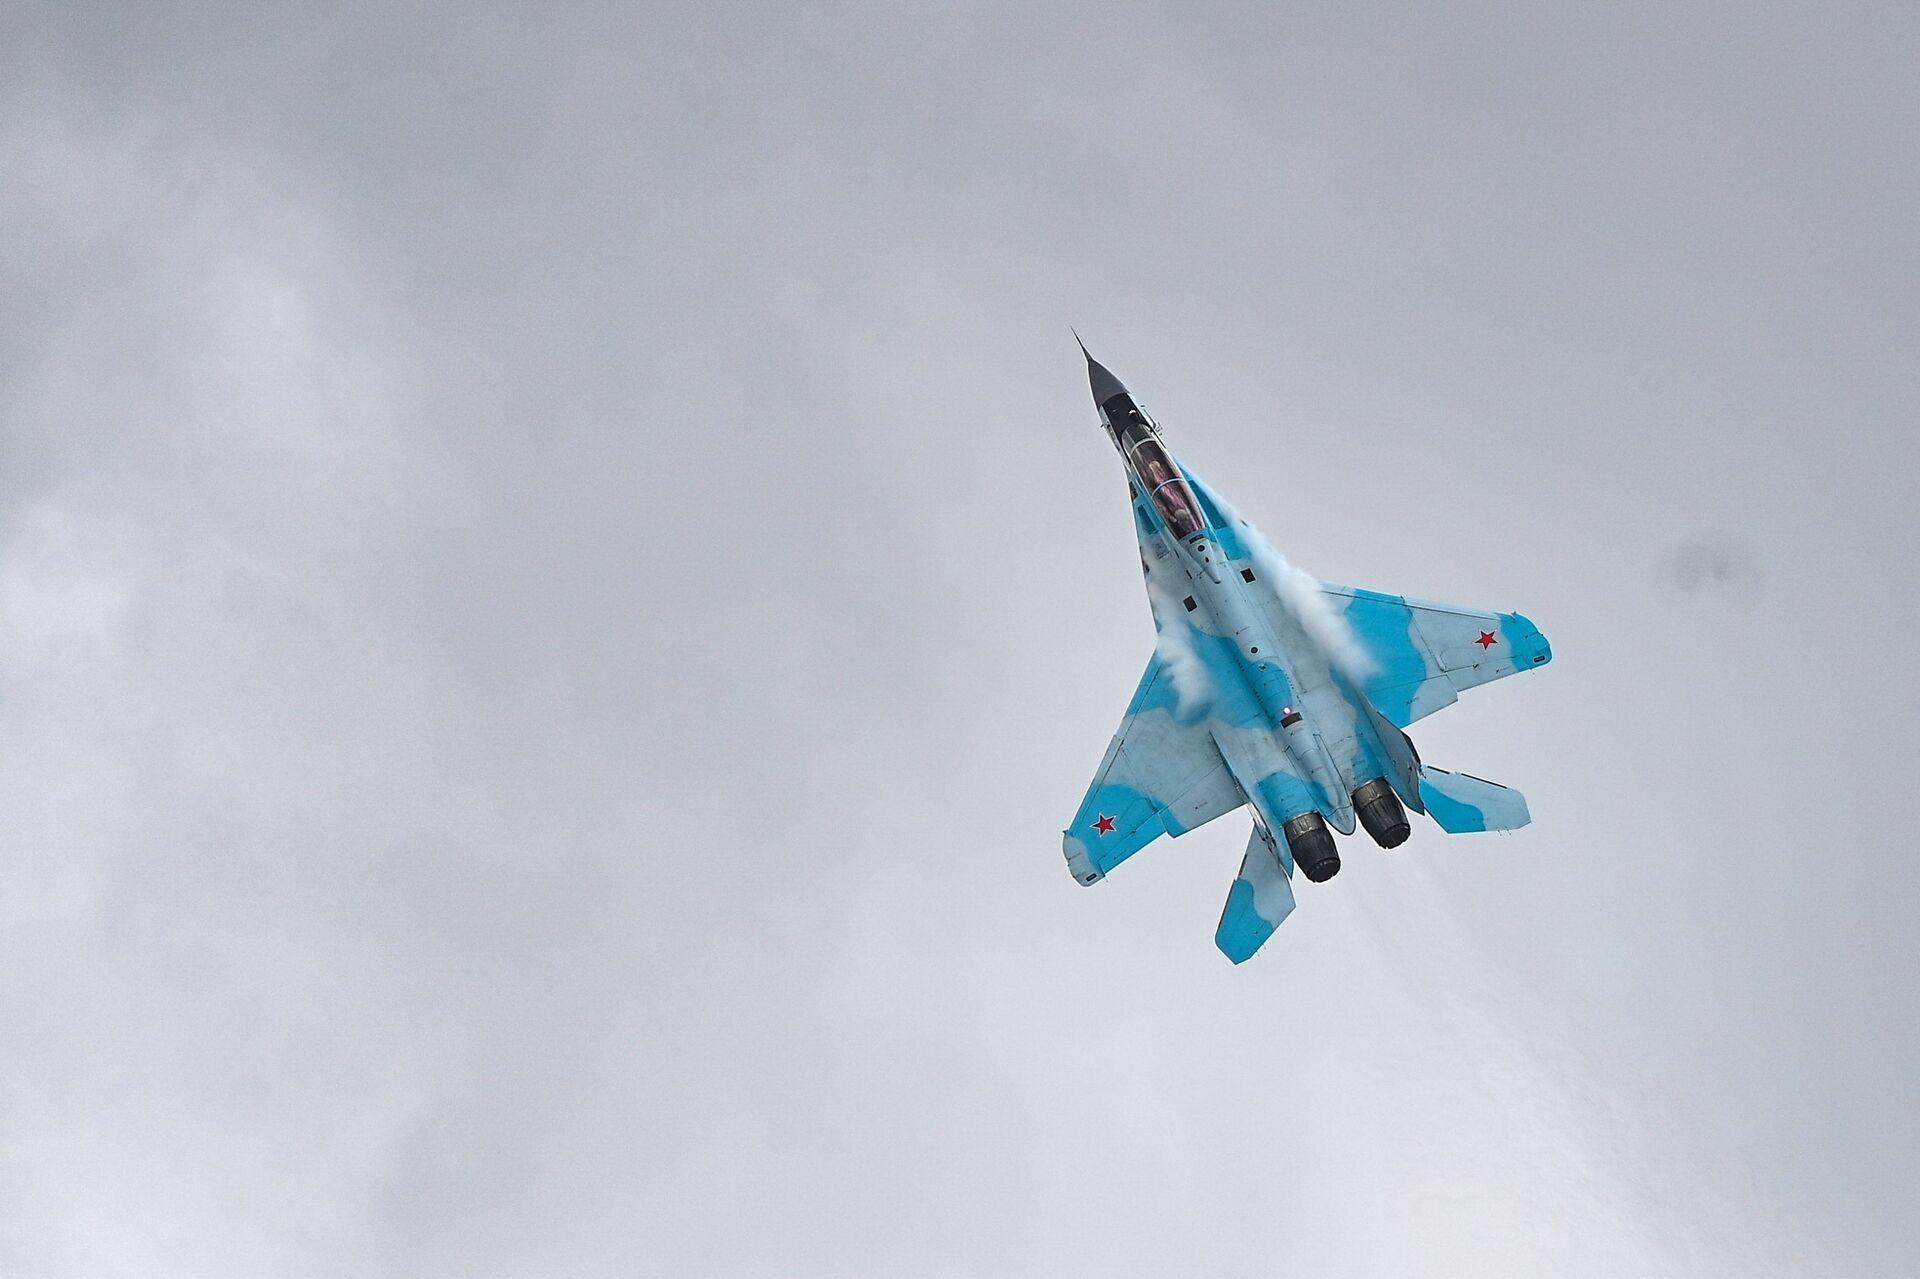 Upgraded Russian fourth-generation jet Su-35 NATO reporting names: Flanker-E) during MAKS-2021 air show - Sputnik India, 1920, 15.10.2023